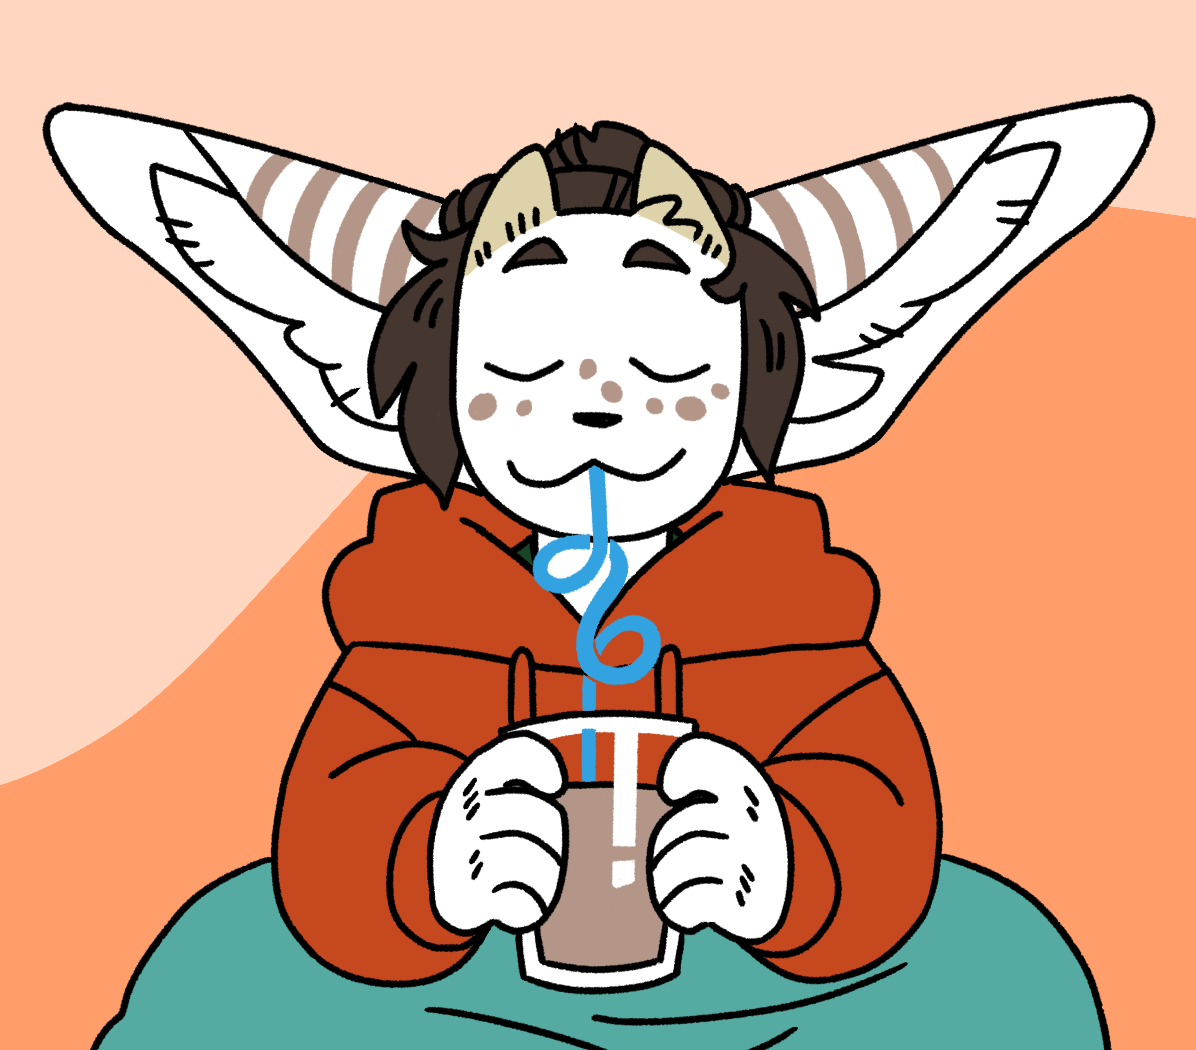 A drawing of a smiling character with a cat-like face, white fur, brown spots like freckles, big long stripey ears, and little horns. they have long brown hair tied in a bun and are wearing a red hoodie with a blanket over their lap. They are drinking a glass of chocolate milk through a curly straw.